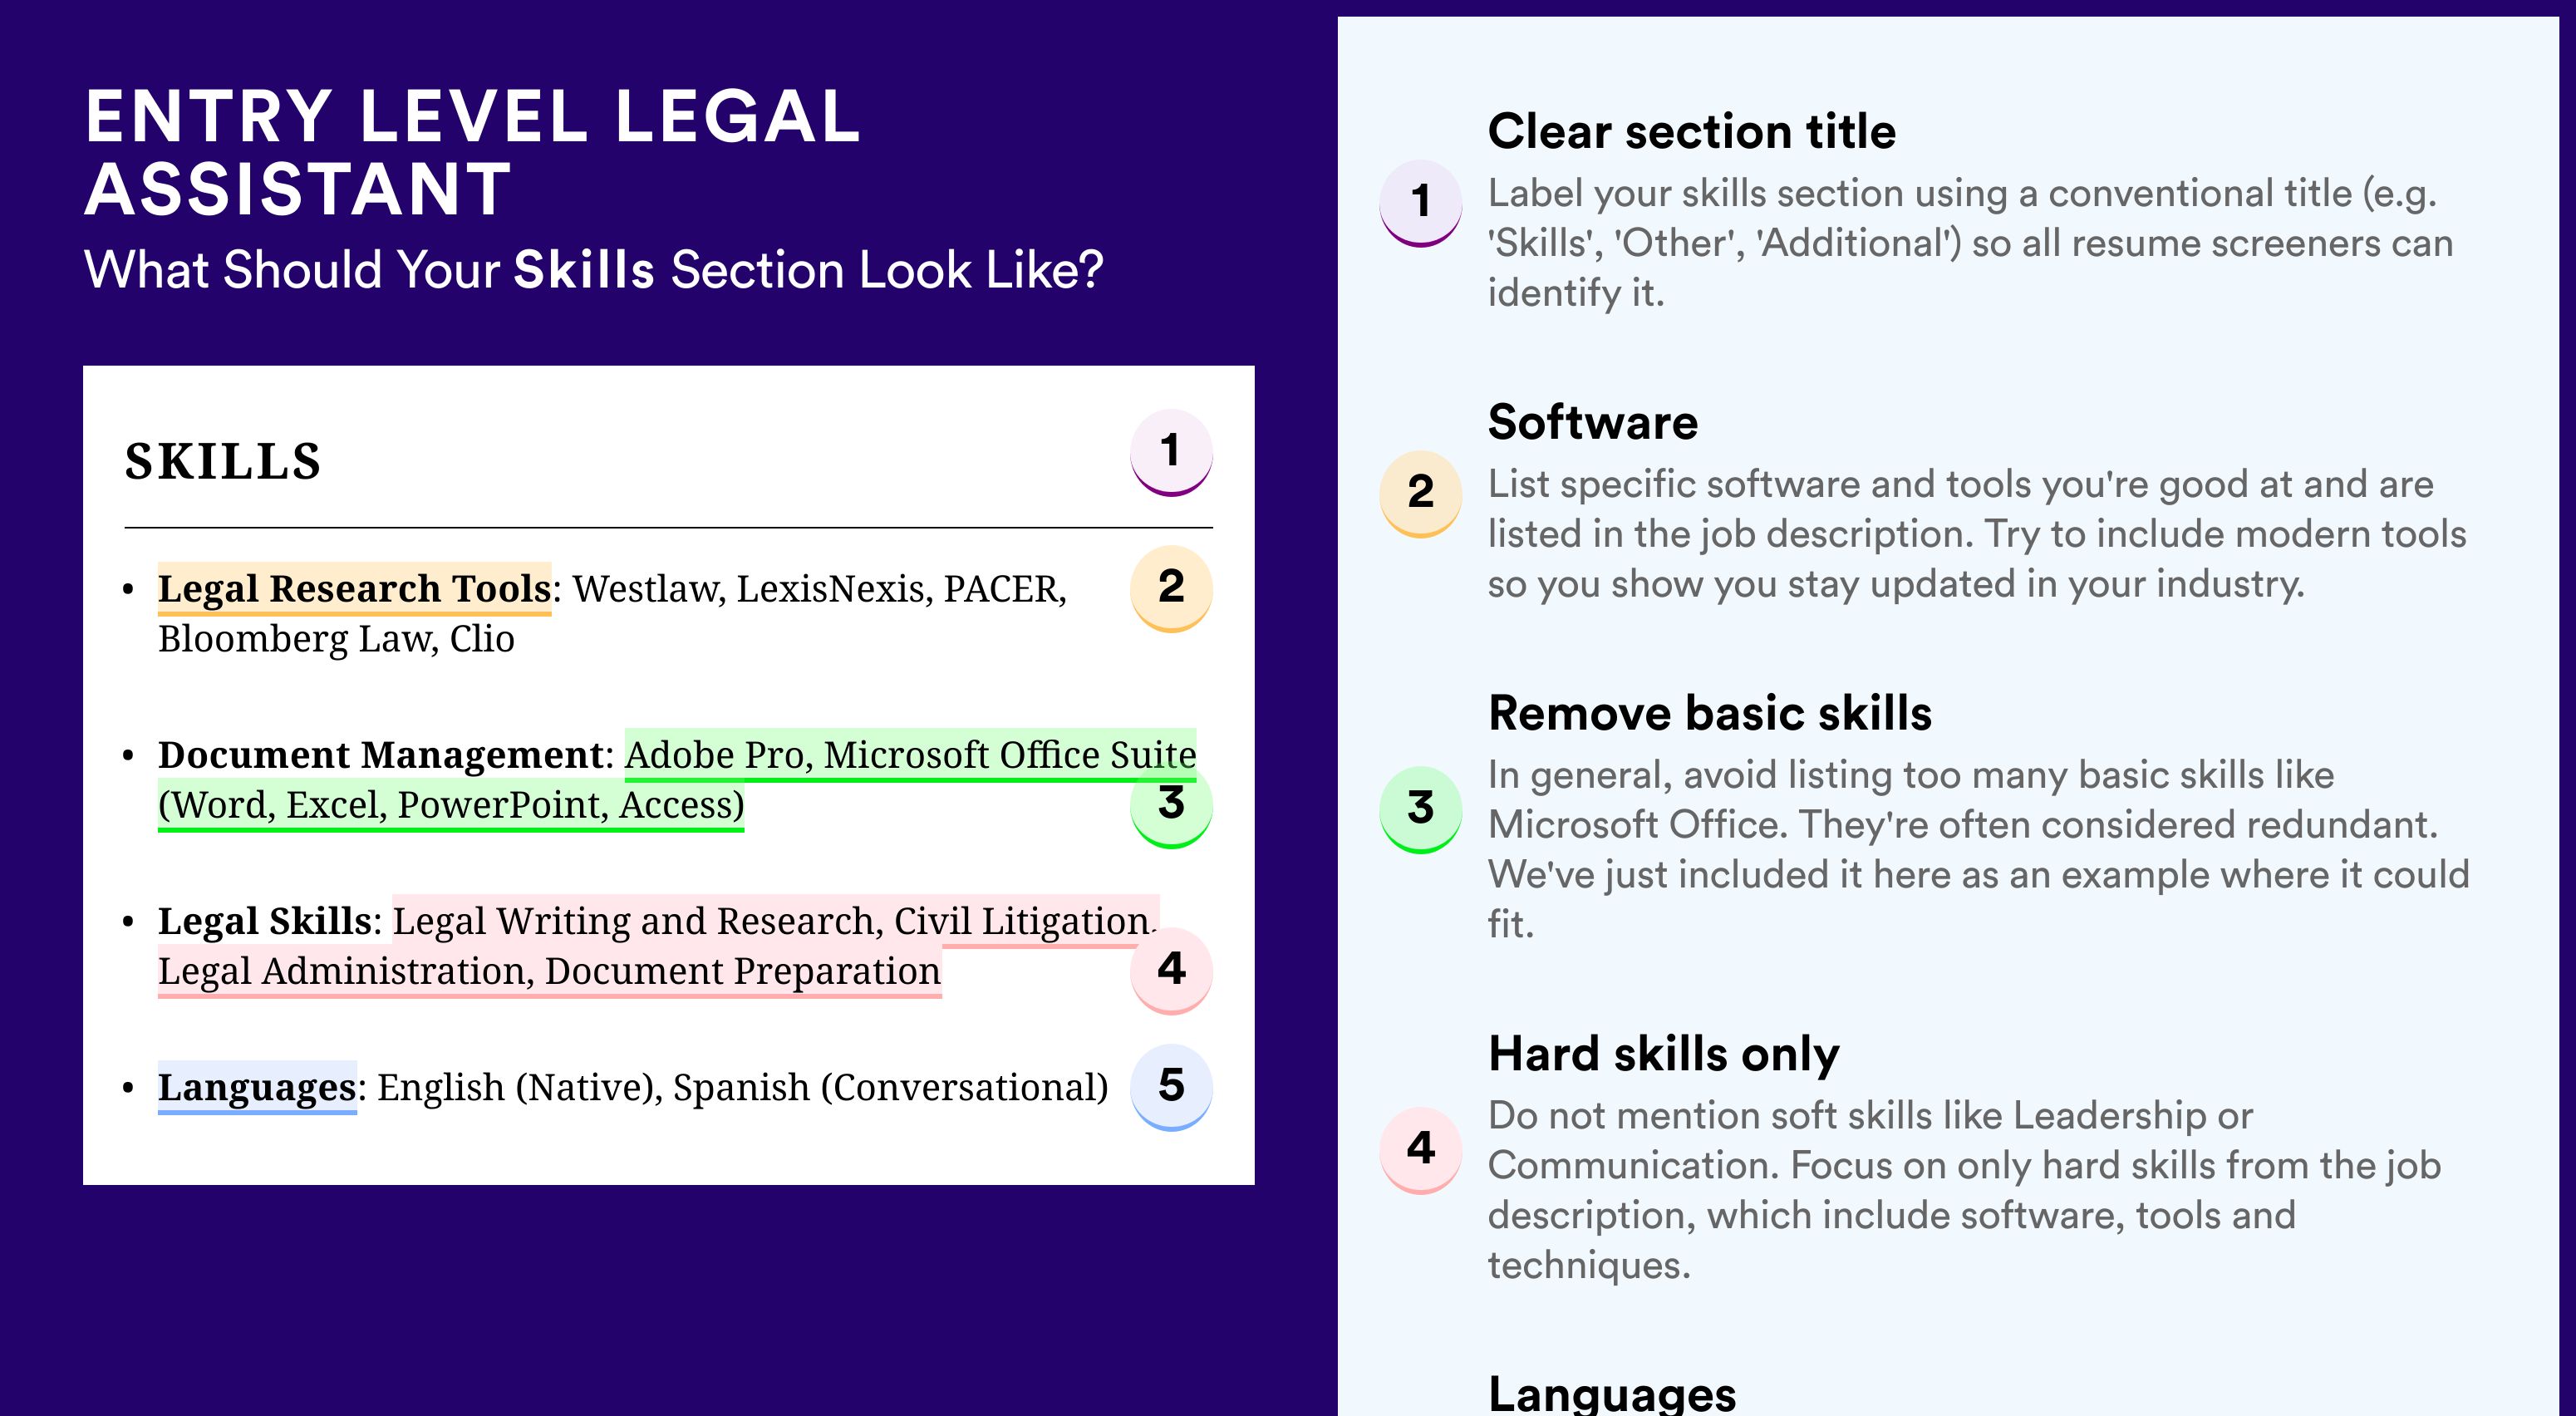 How To Write Your Skills Section - Entry Level Legal Assistant Roles